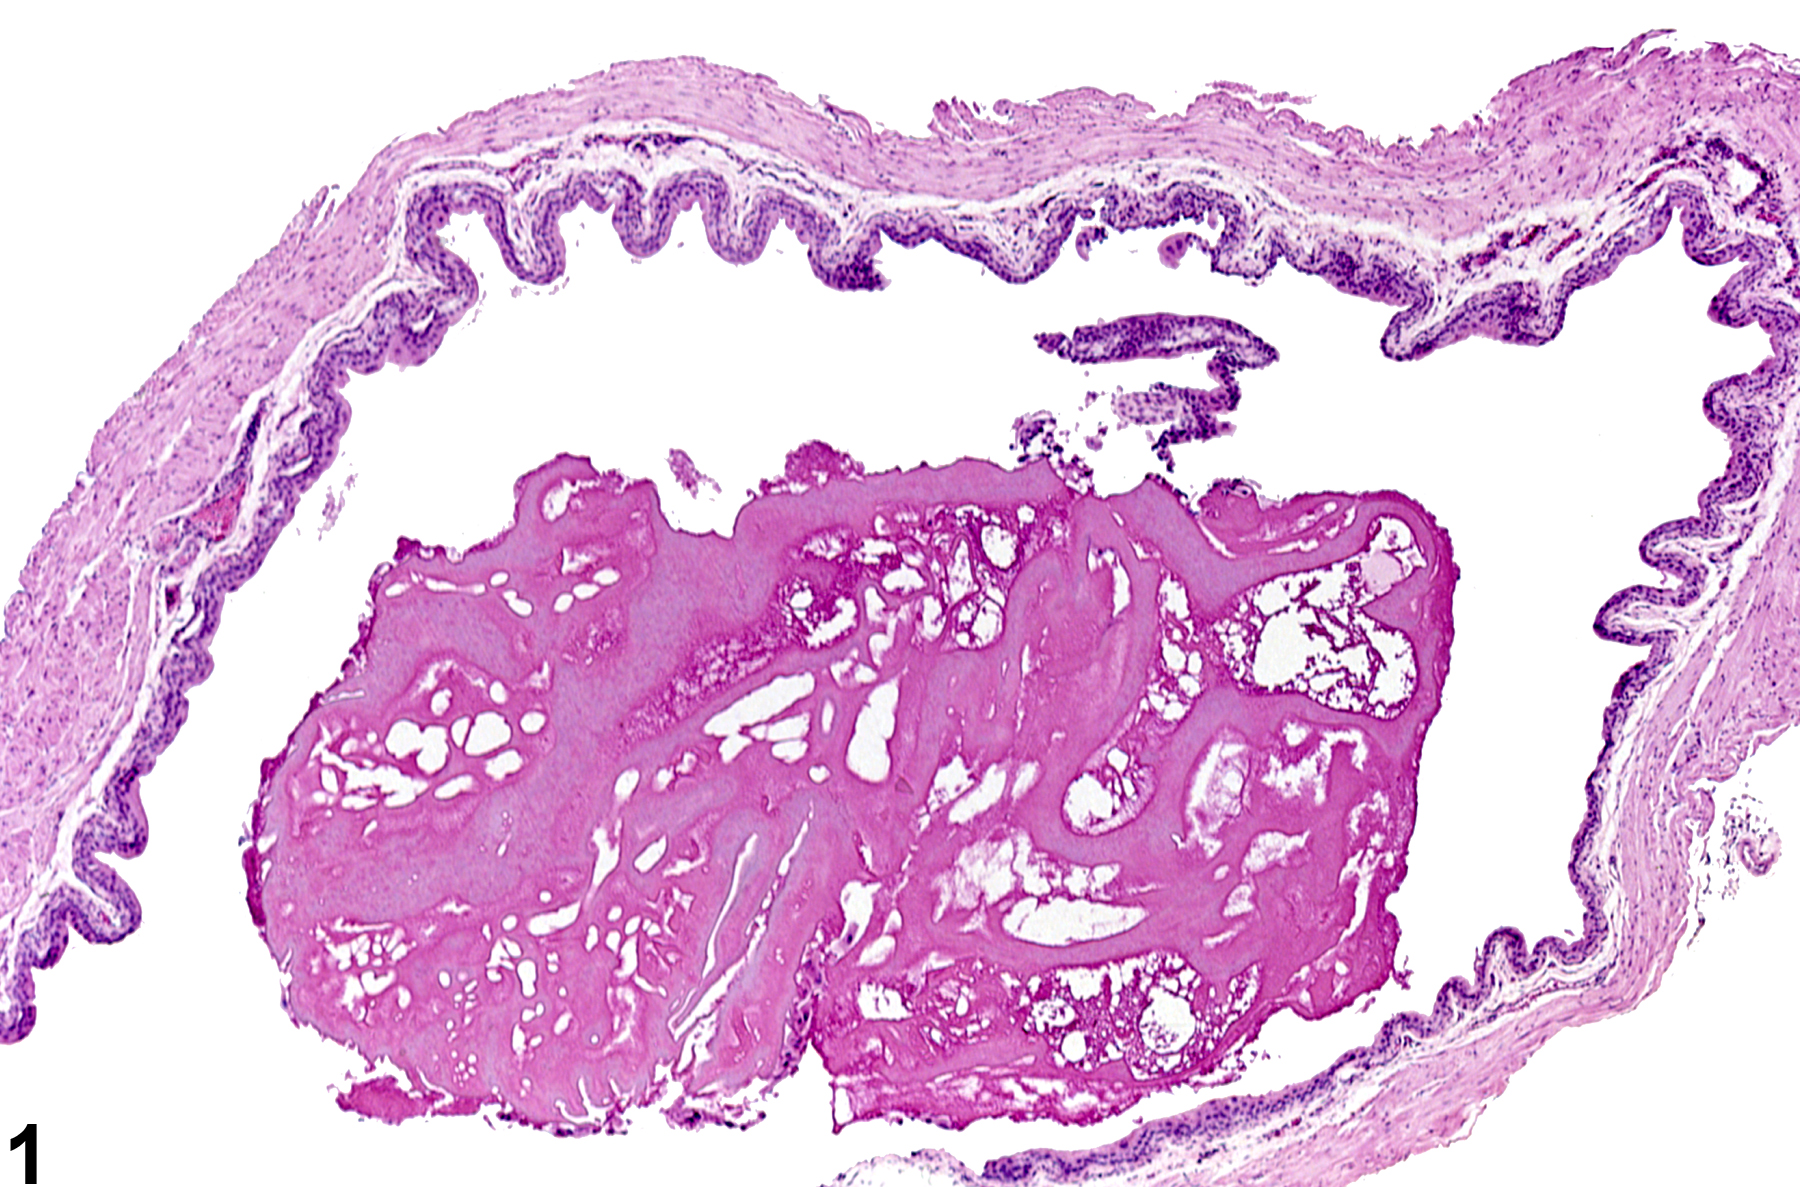 Image of proteinaceous plug in the urinary bladder from a male B6C3F1 mouse in a chronic study